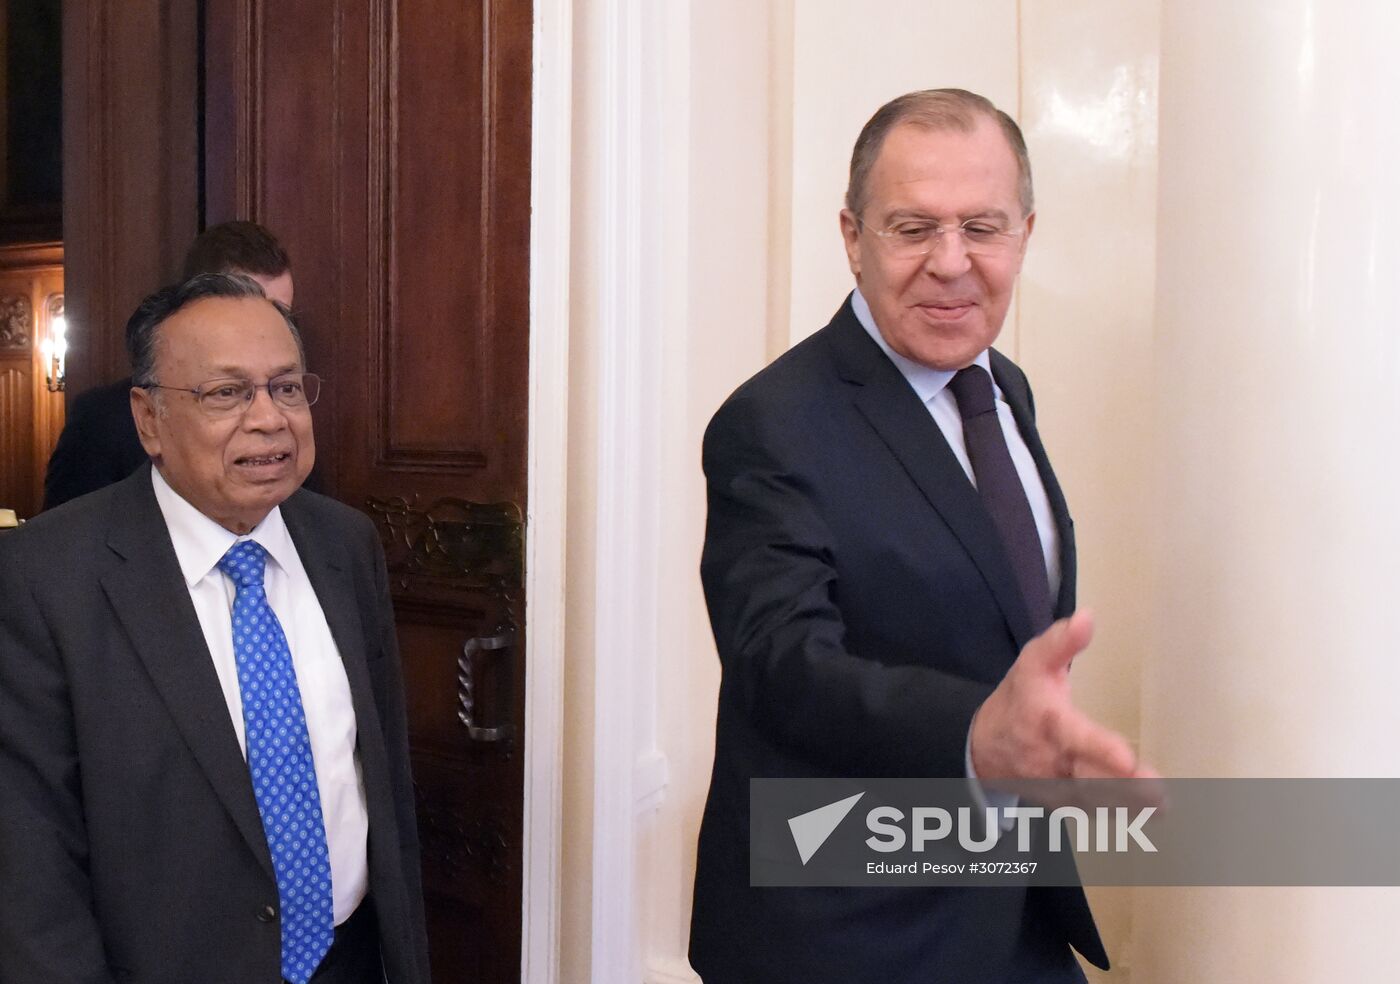 Russian Foreign Minister Sergei Lavrov meets with Foreign Minister of Bangladesh Abul Hassan Mahmud Ali